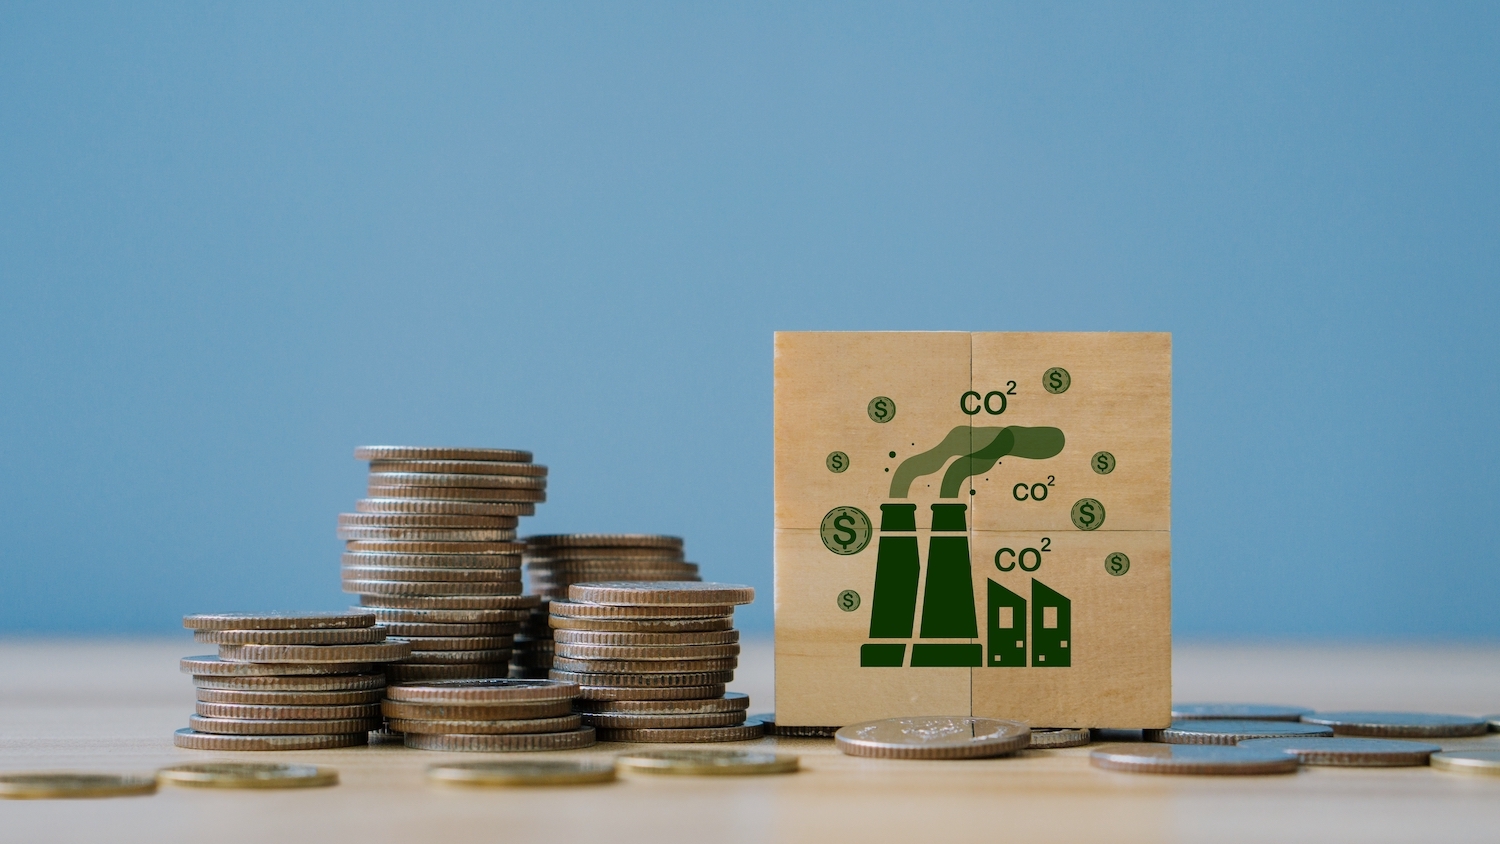 A stack of coins and a wooden tile with a drawing of smokestacks illustrate the idea of greenhouse emissions taxes.